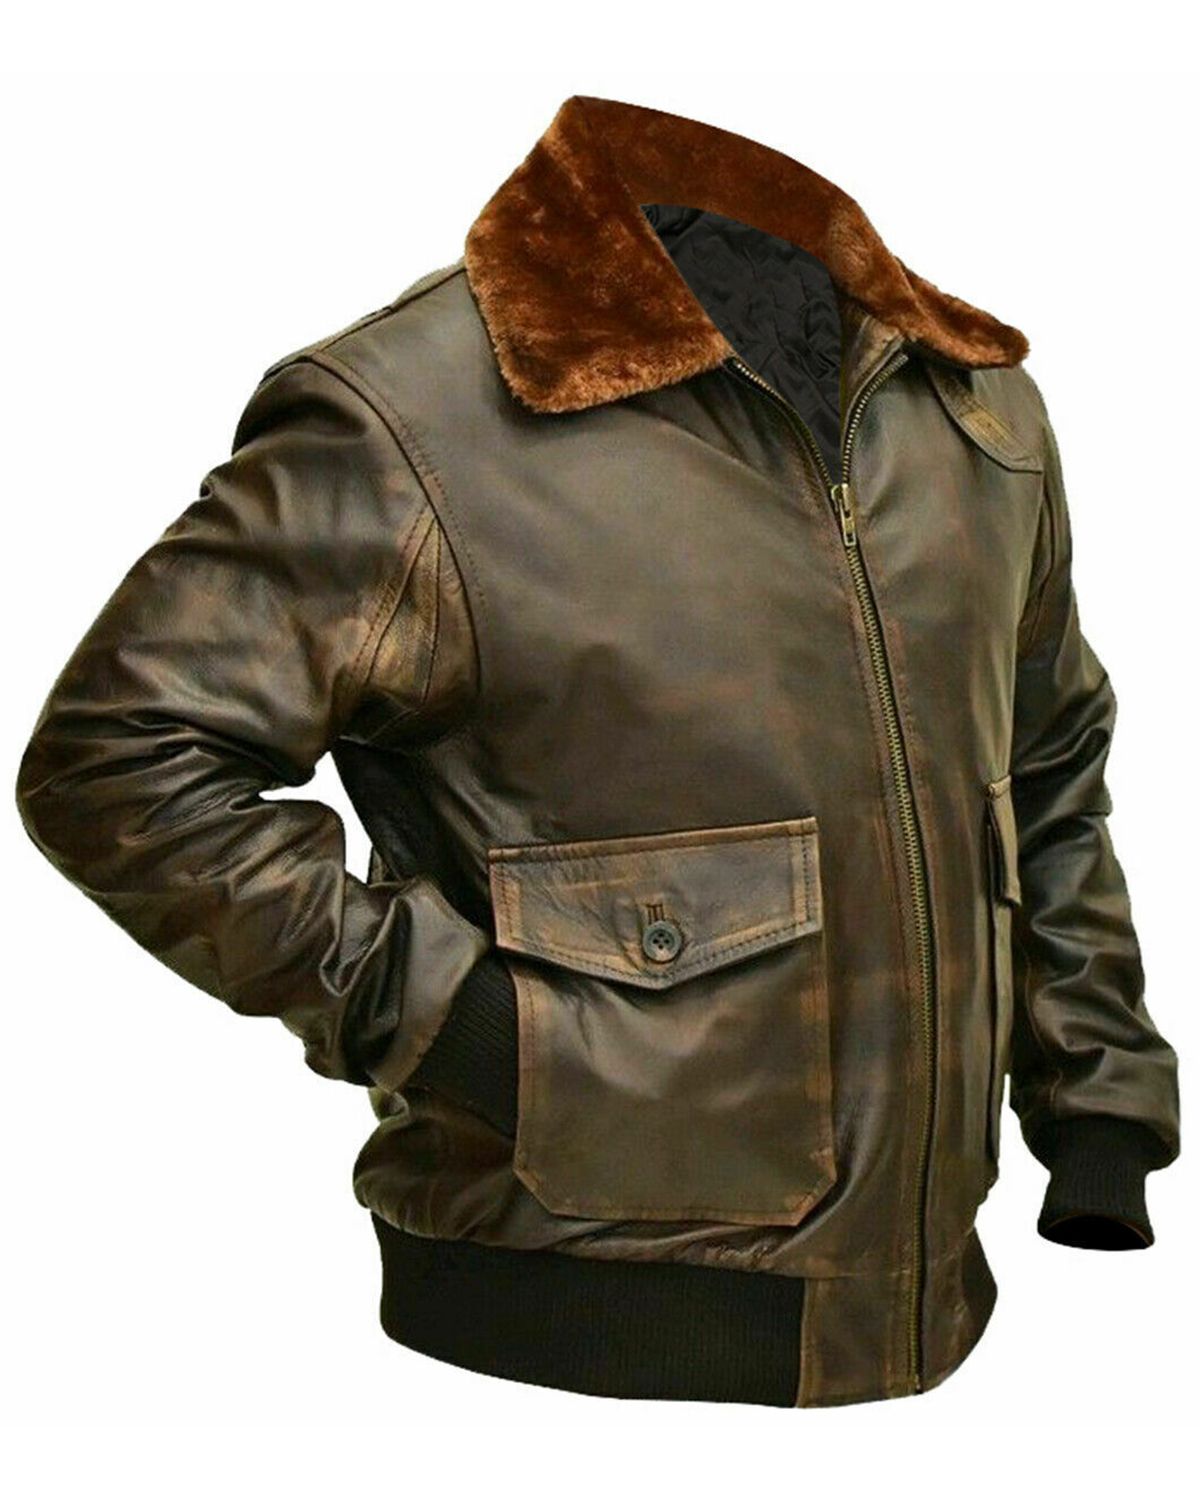 Elite Men's Distressed Brown G1 Aviator A2 Bomber Leather Jacket